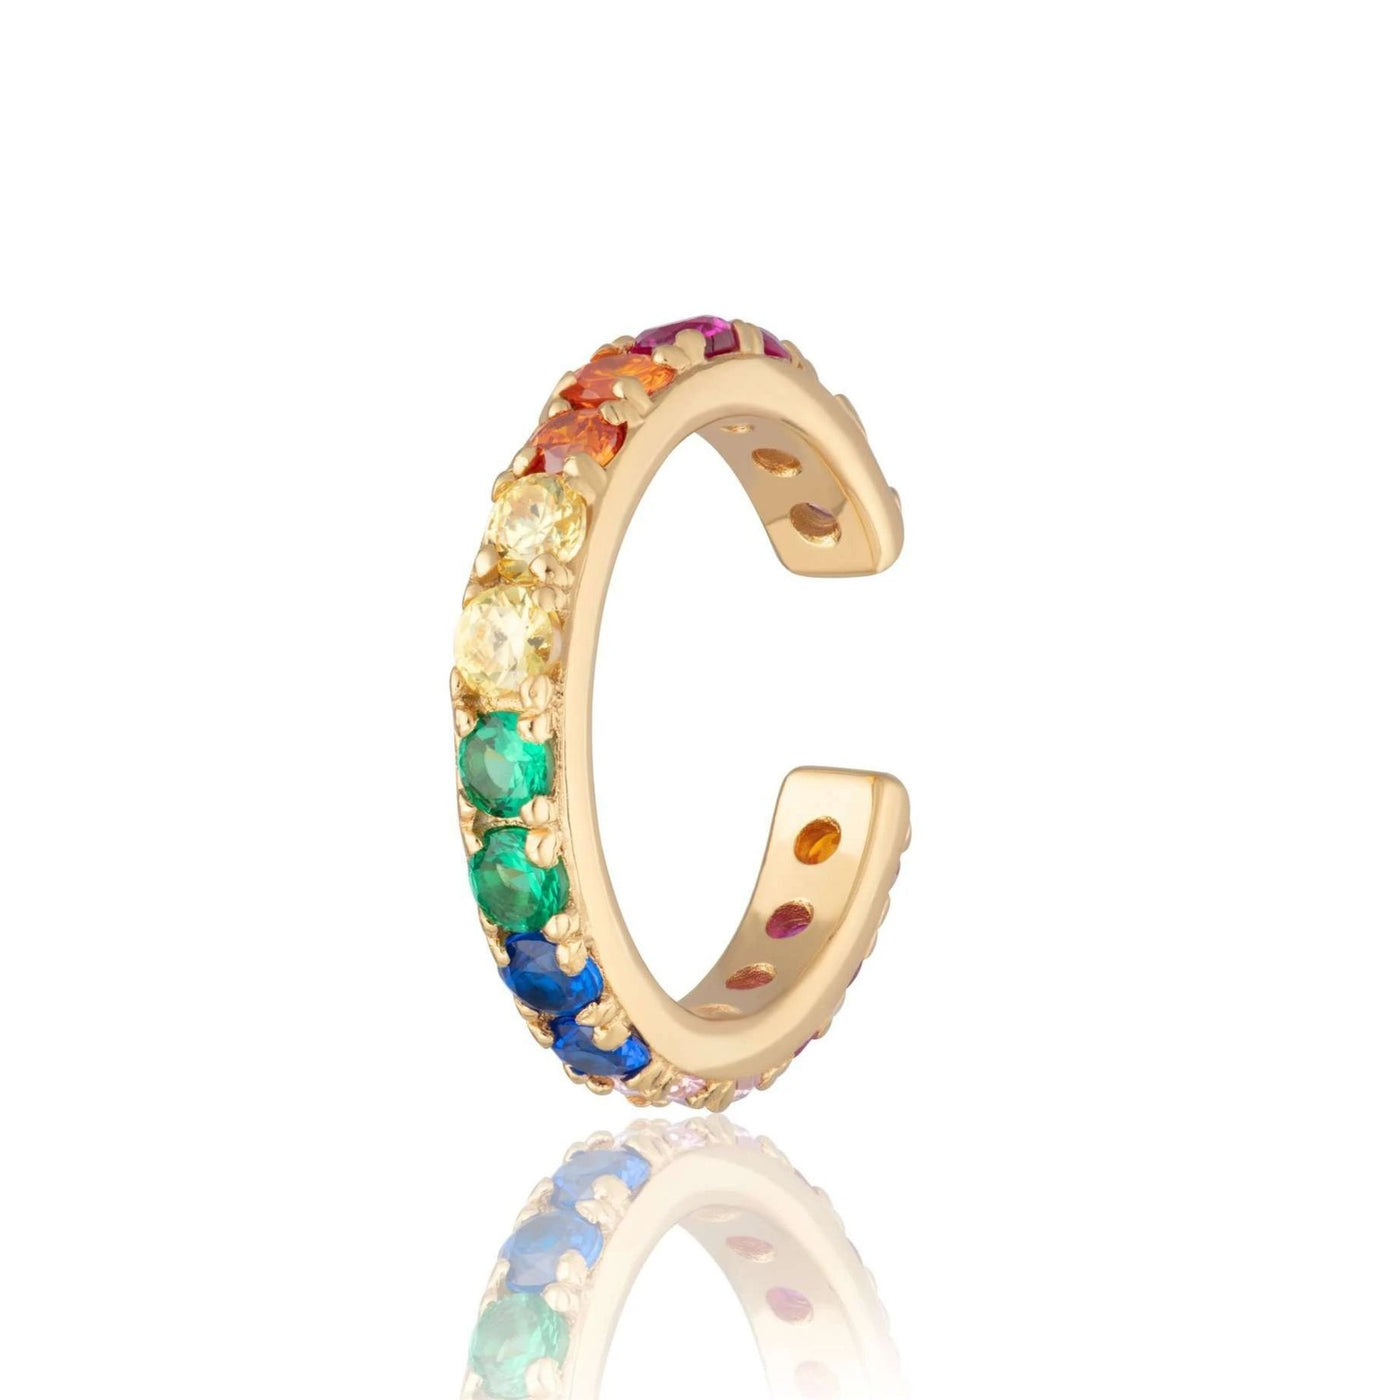 Single Ear Cuff with Rainbow Stones in Gold Plated Silver